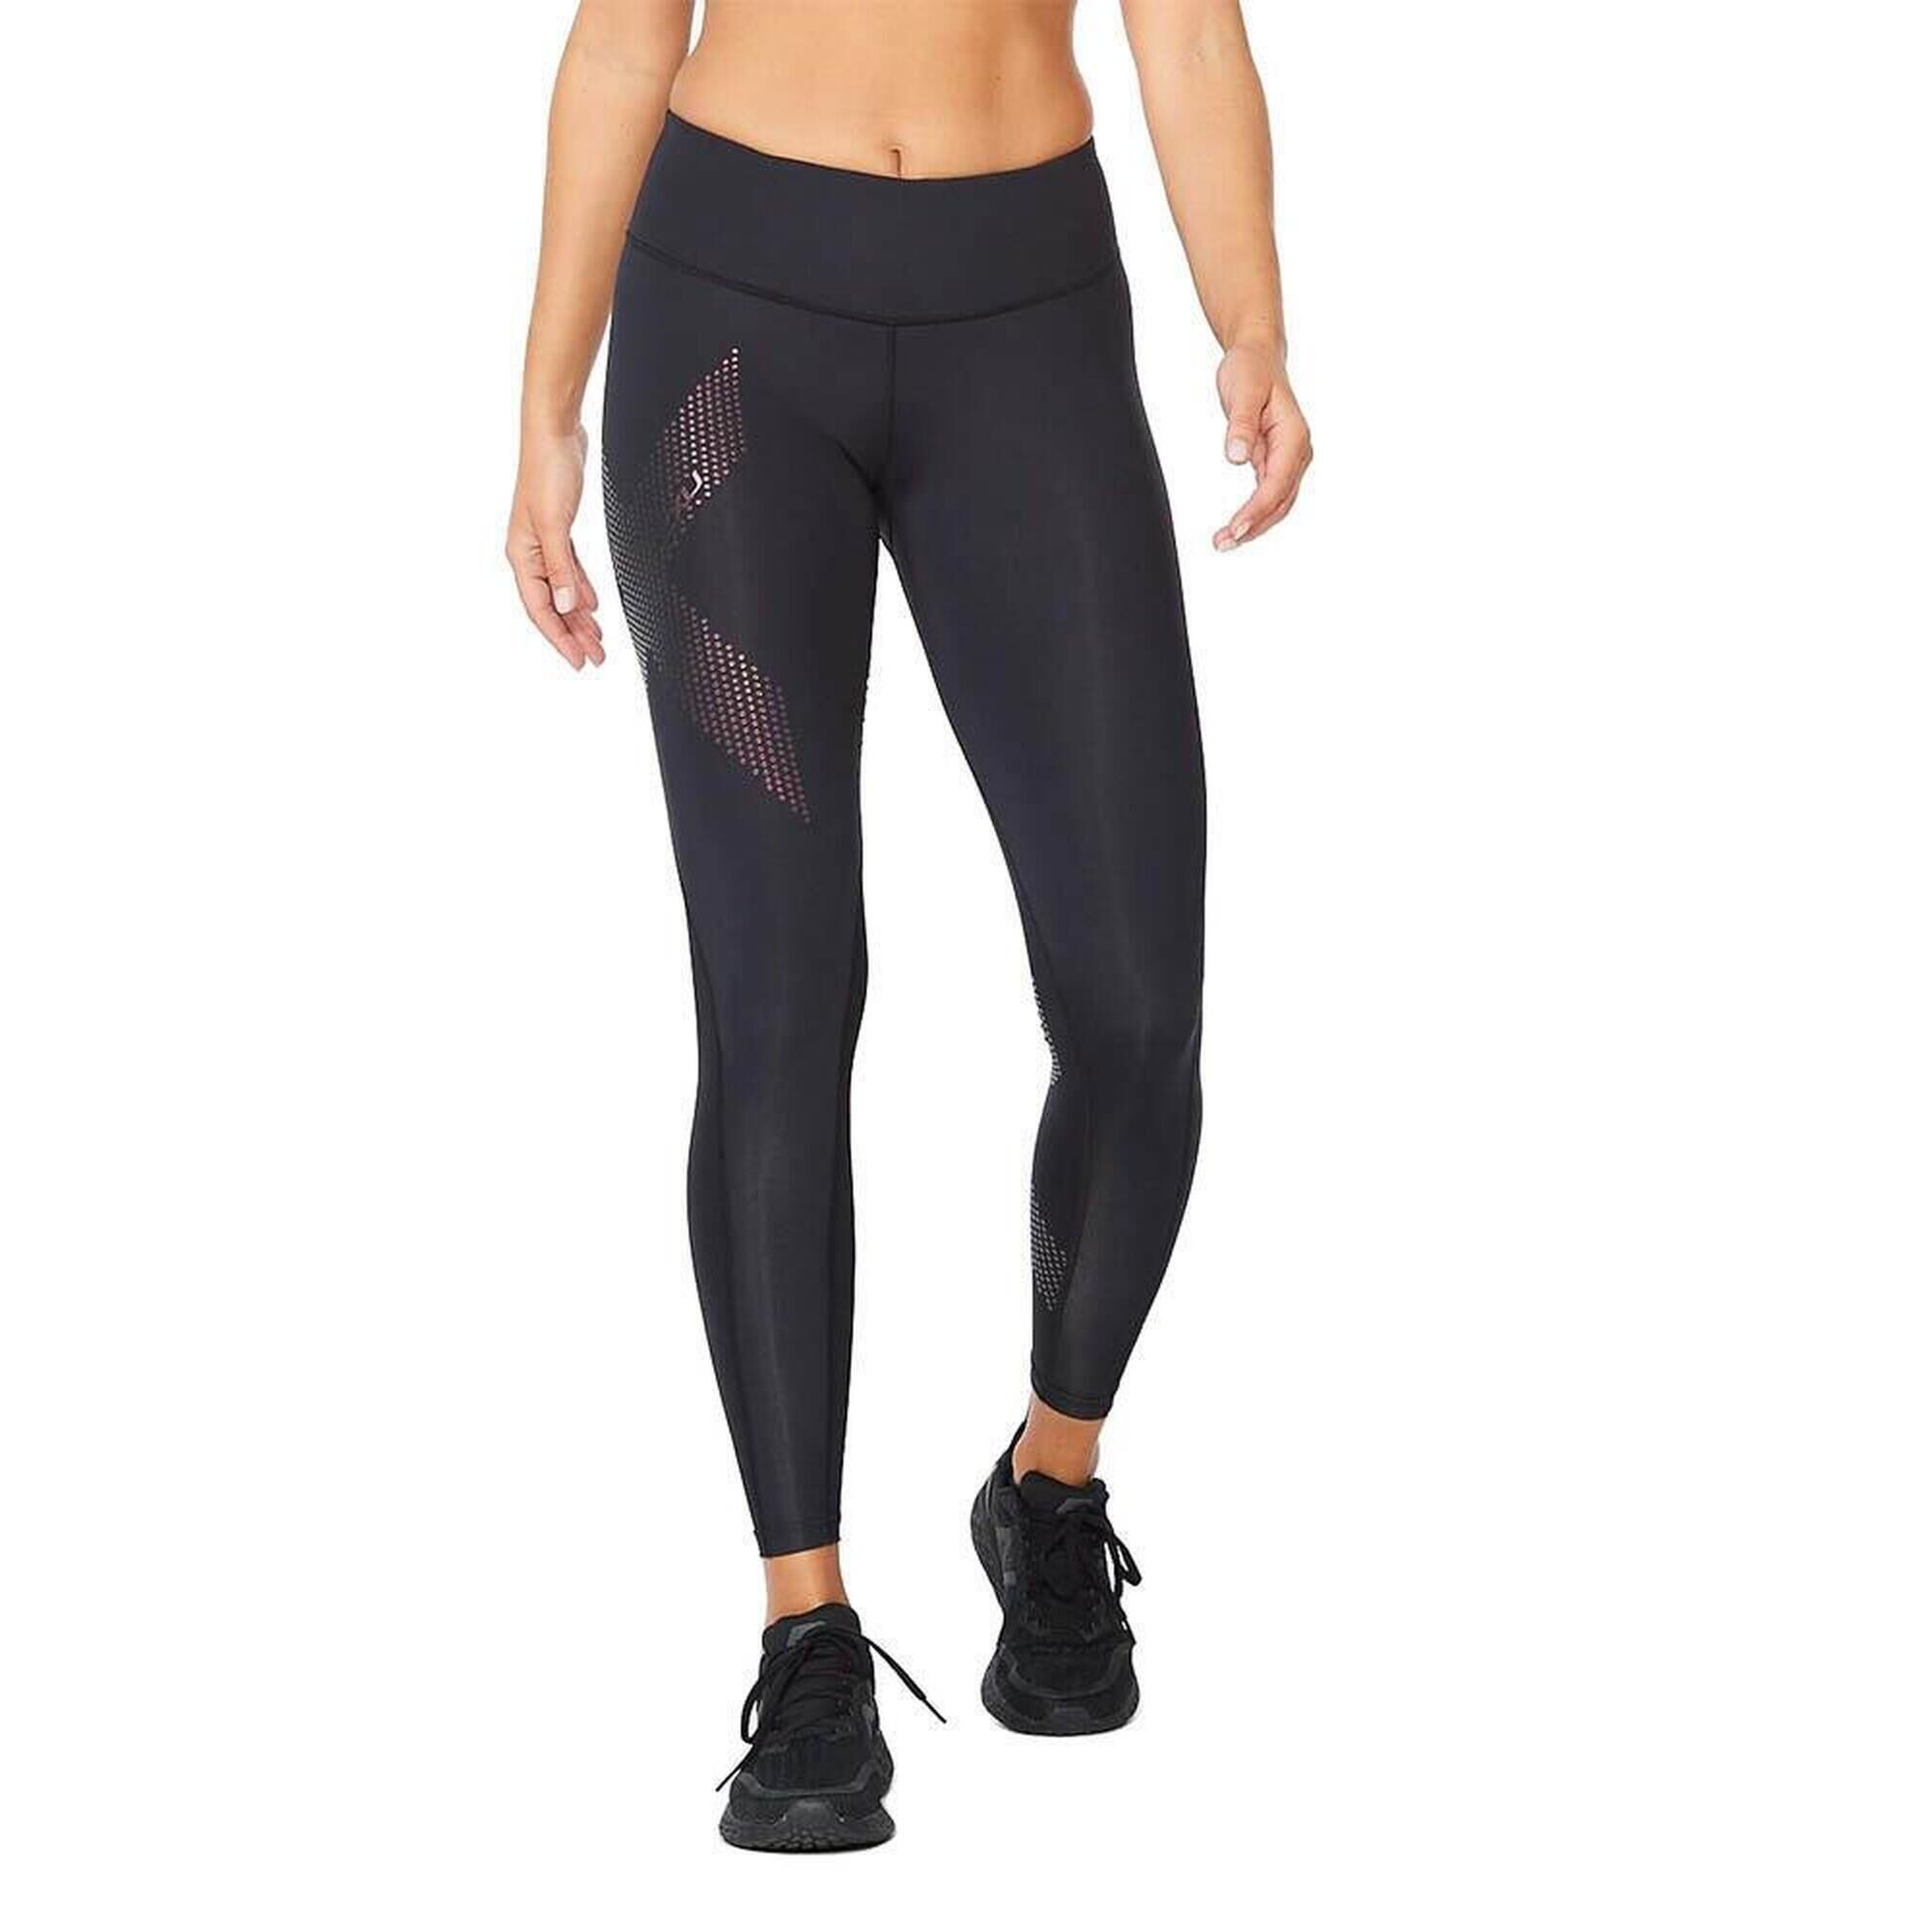 Extra Strong Compression Stirrup Leggings with Tummy Control Short